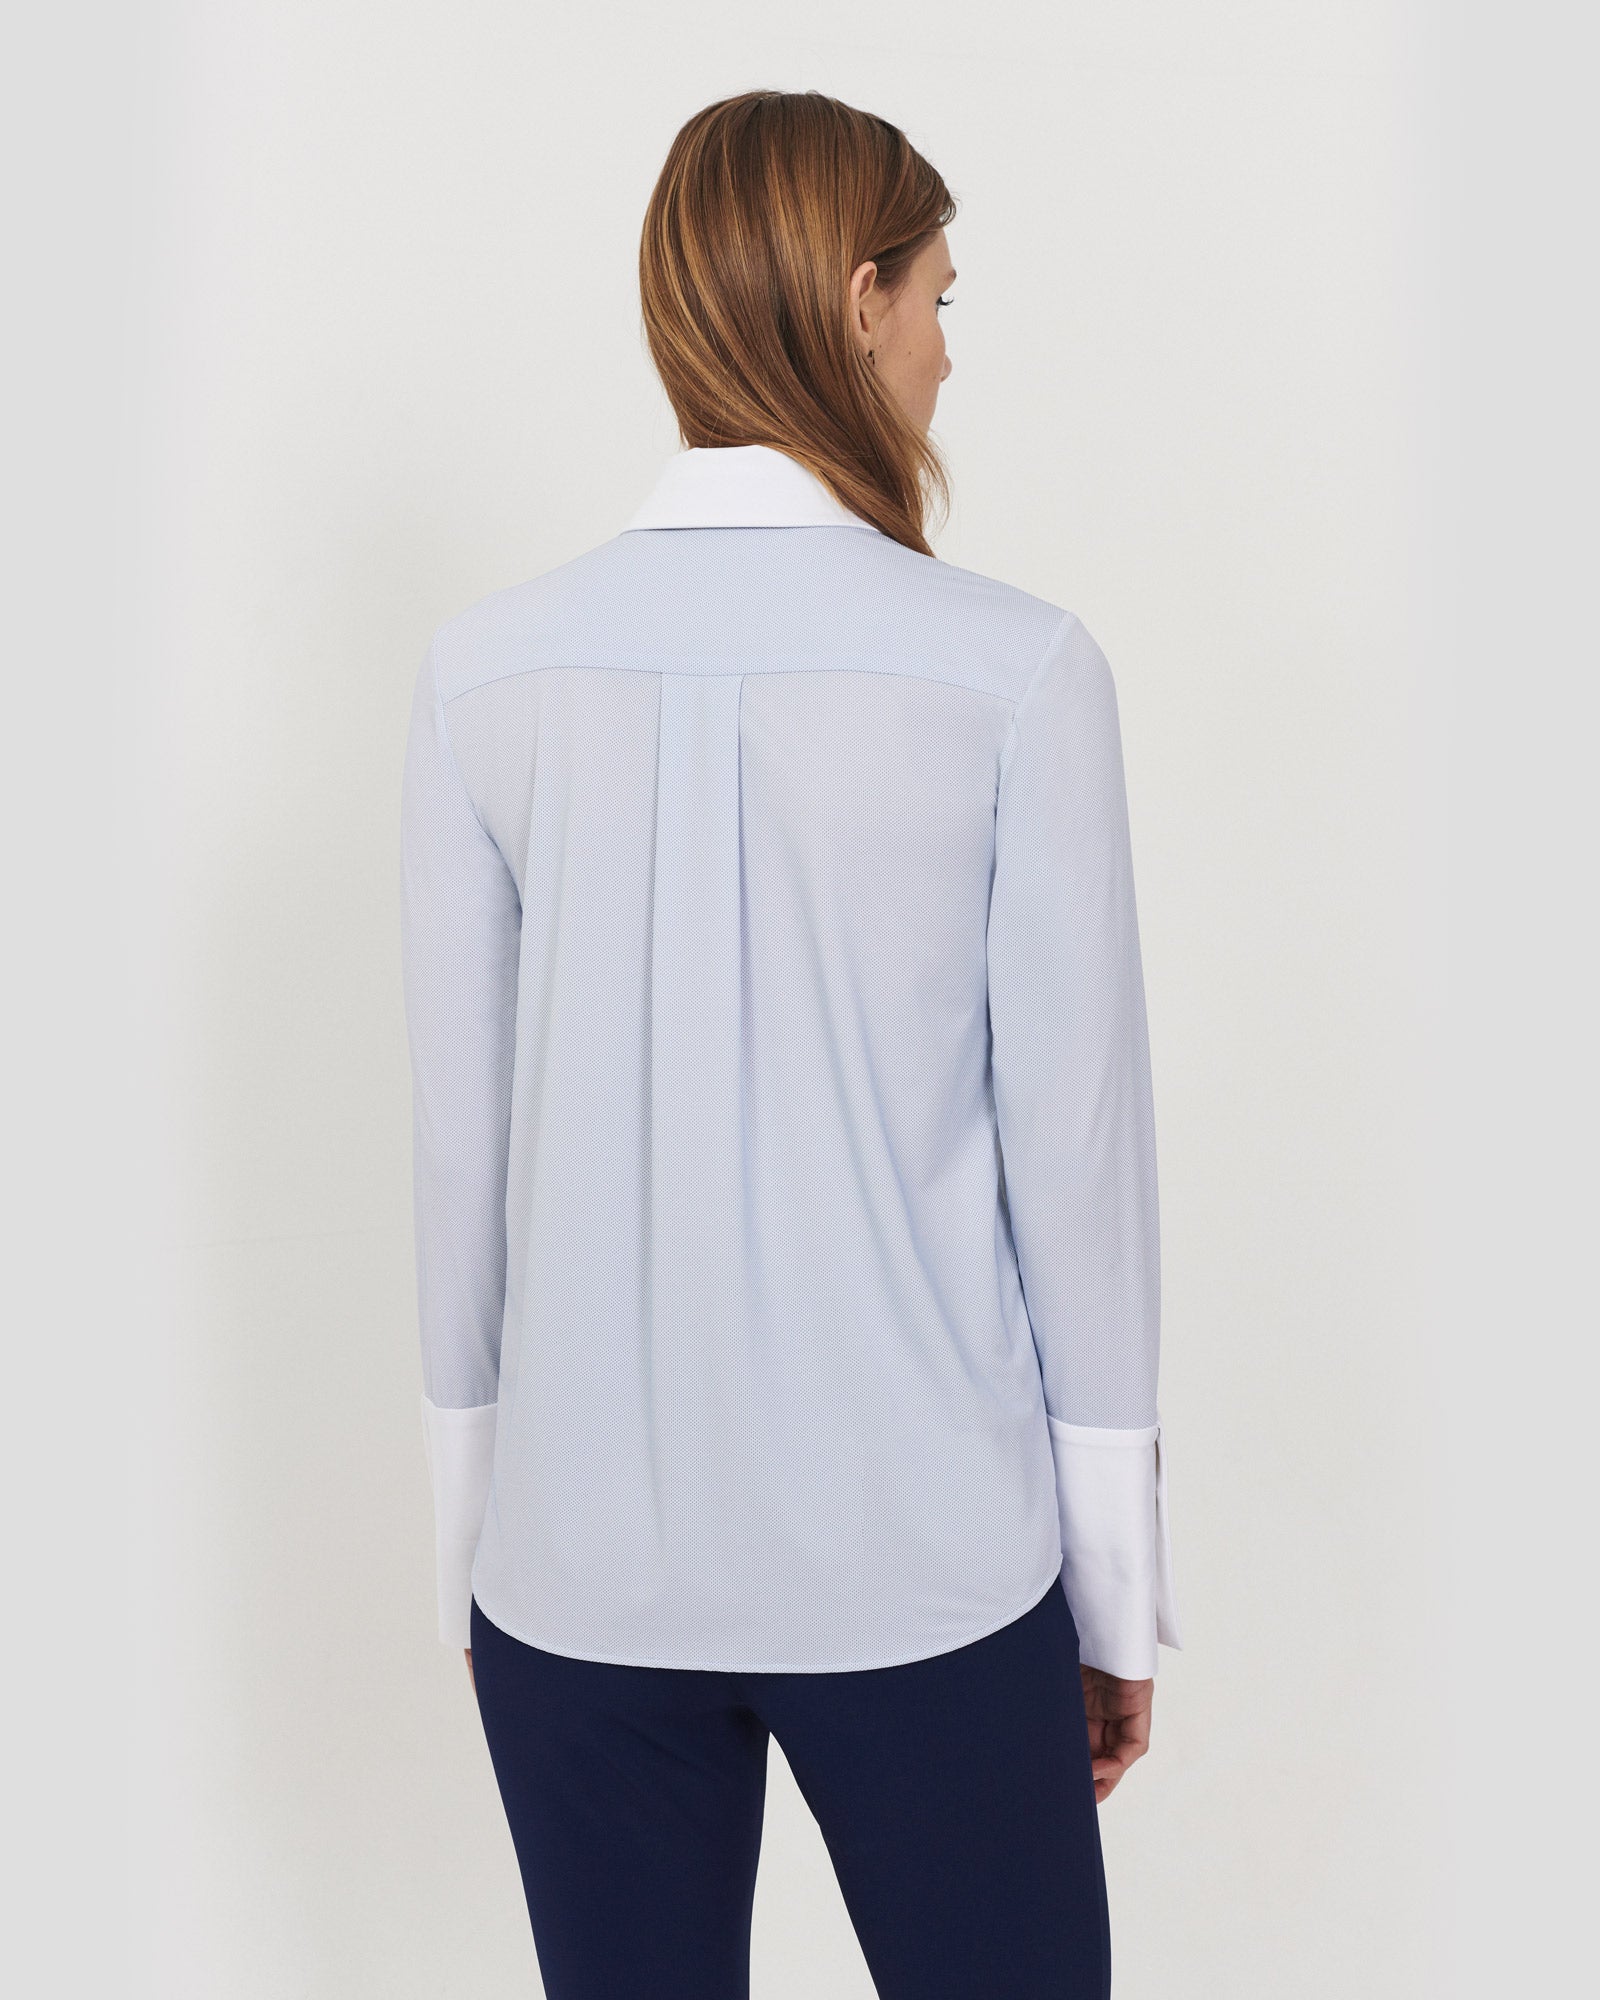 Now and Forever Blouse Technical Sky 2.0 - Final Sale